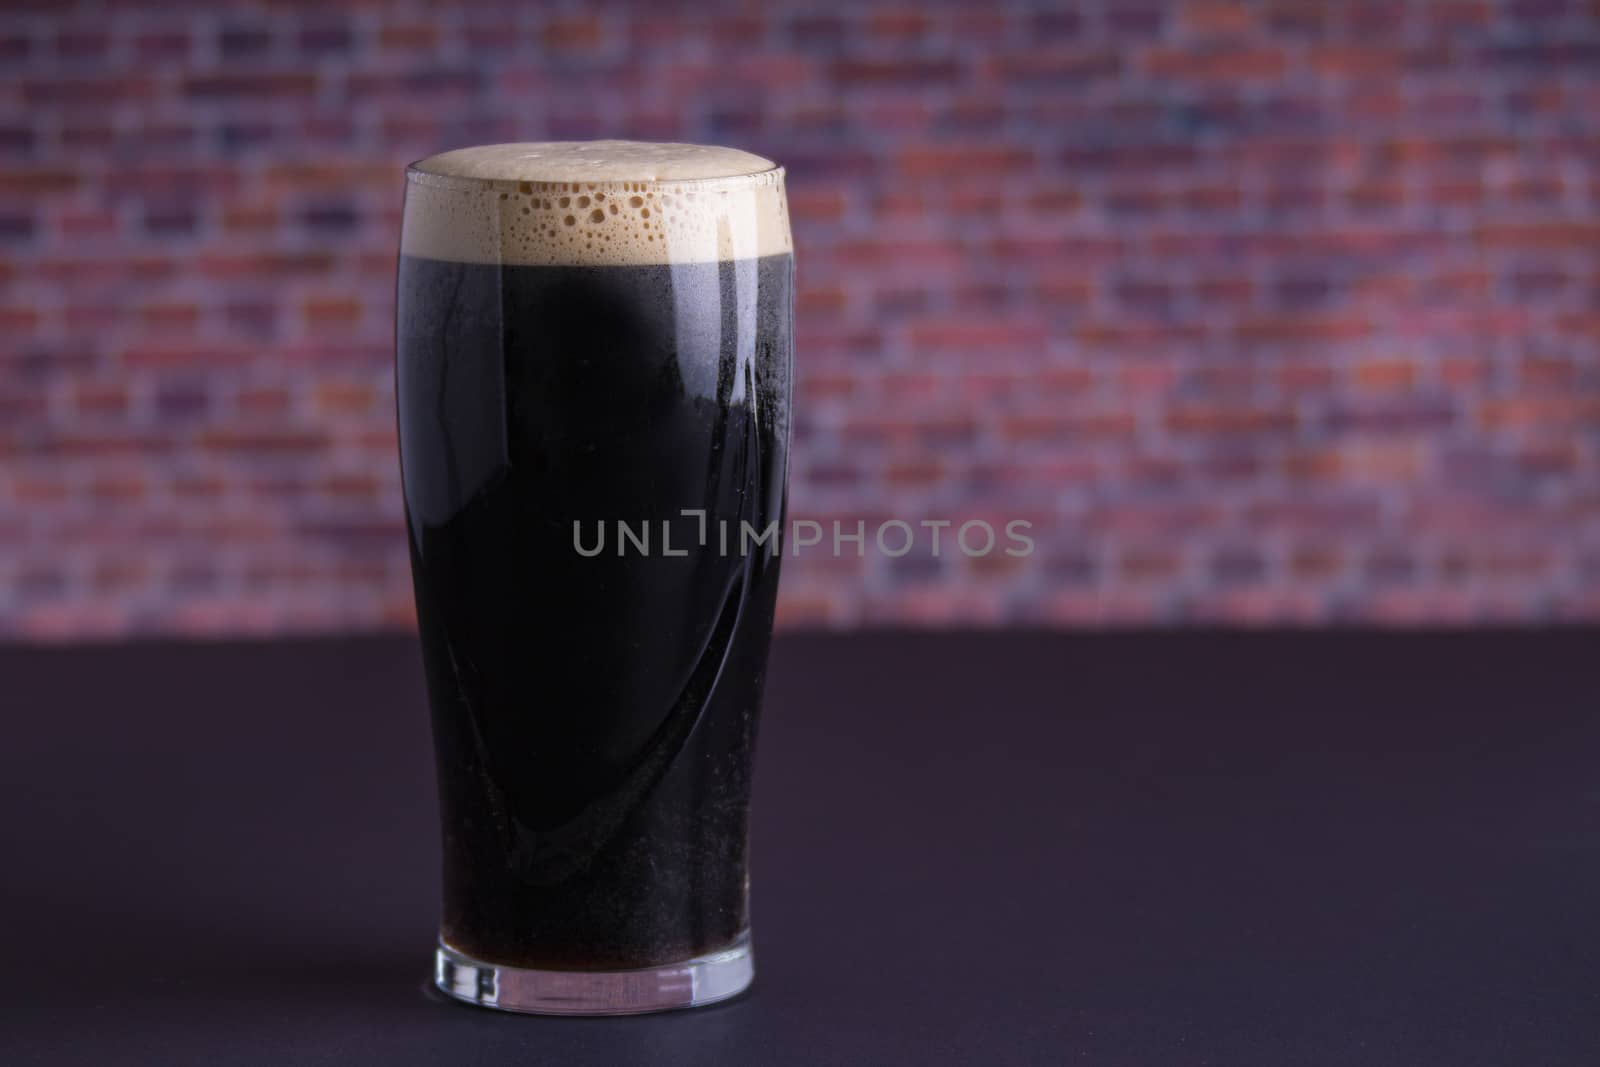 A Guinness dark Irish dry stout beer glass that originated in th by oasisamuel